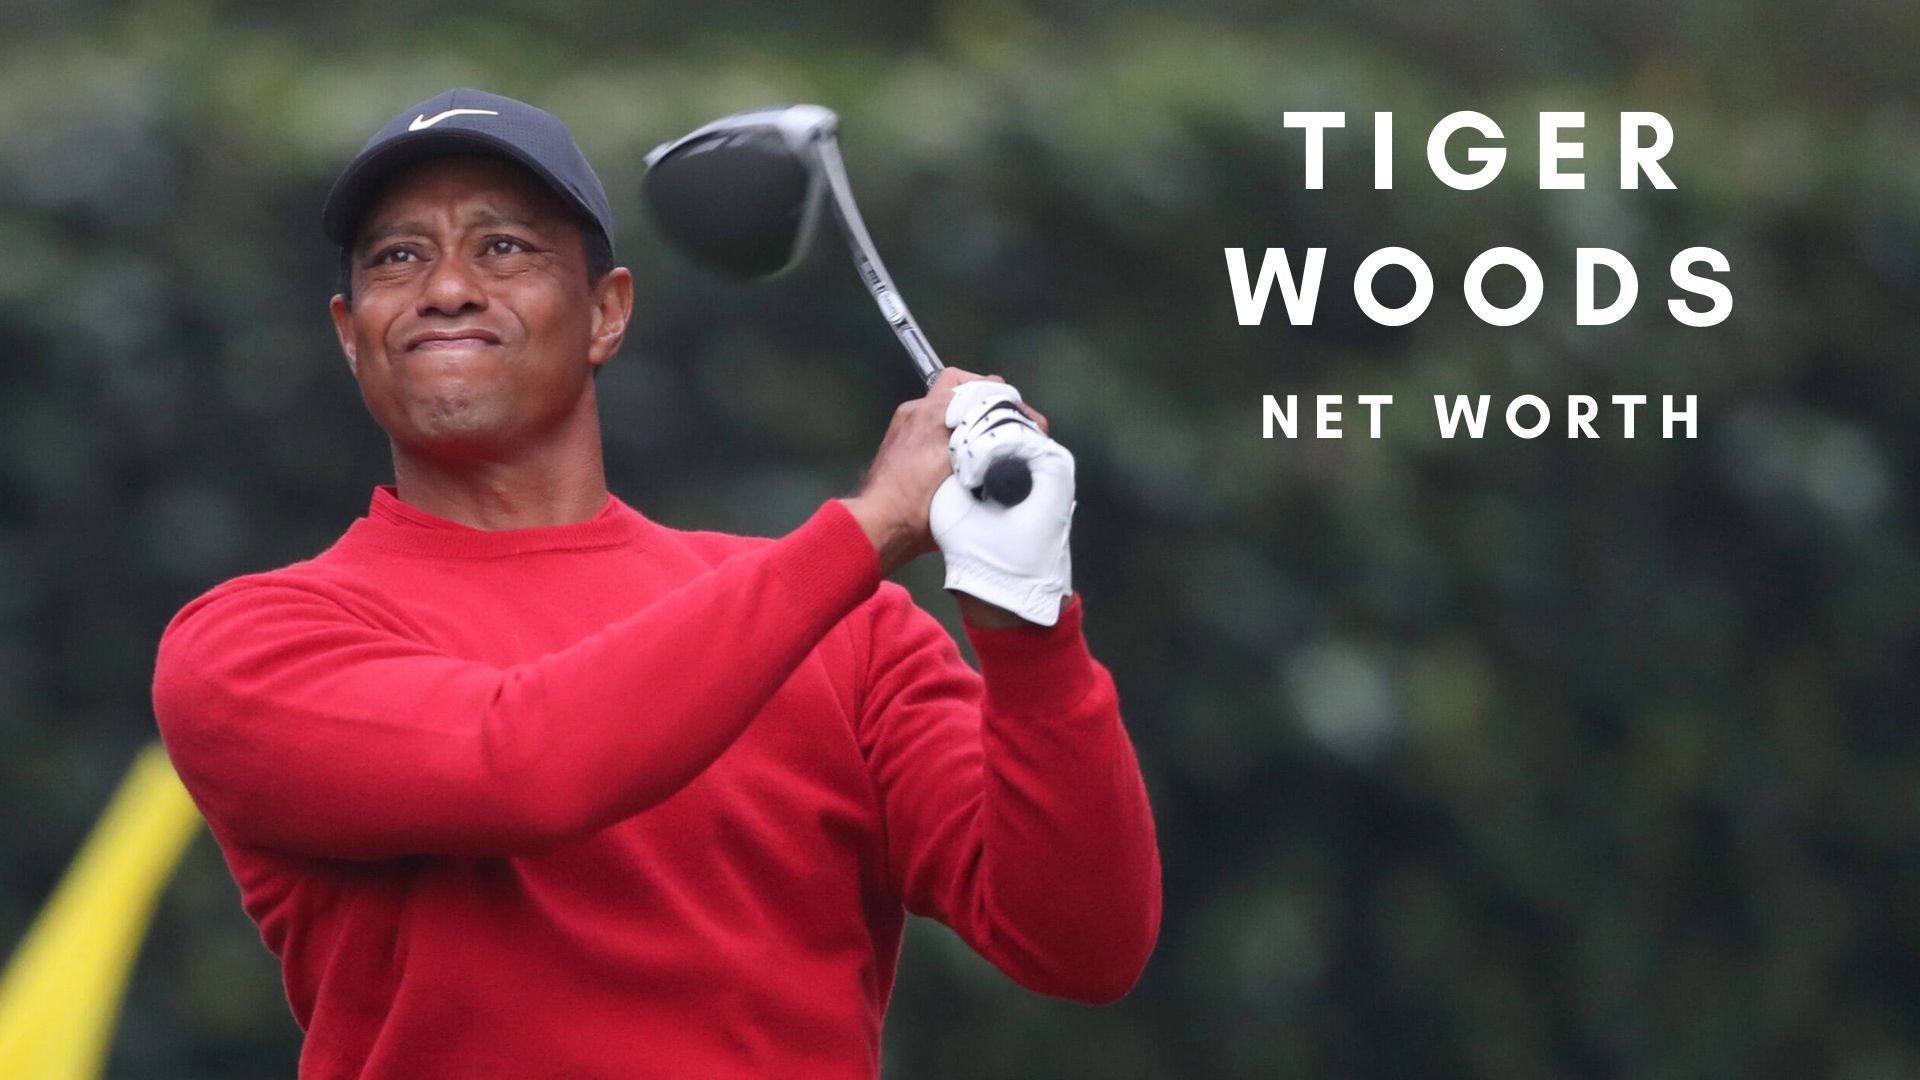 Tiger Woods 2021 - Net Worth, Salary, Records, and Endorsements.